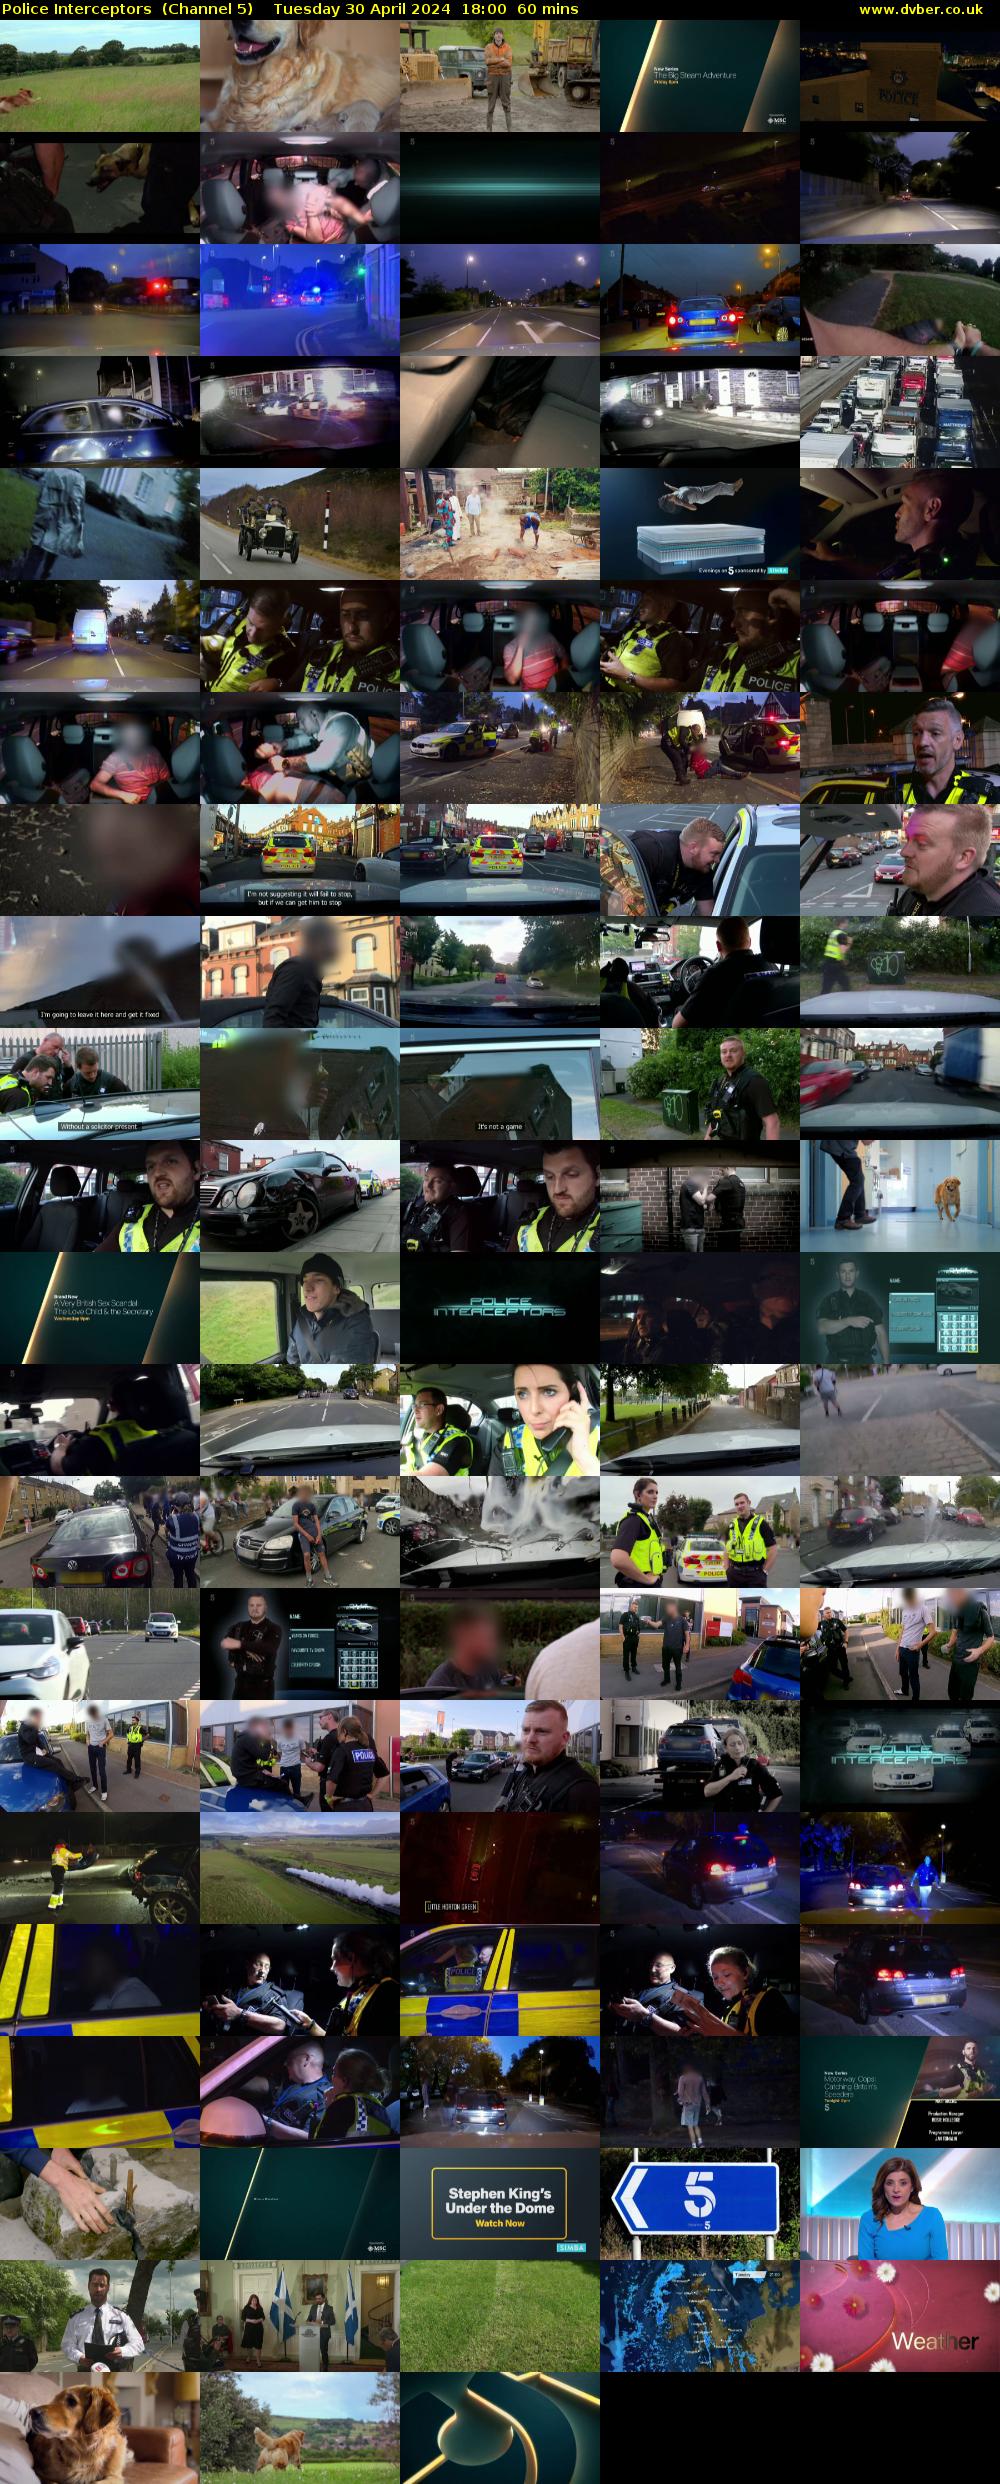 Police Interceptors  (Channel 5) Tuesday 30 April 2024 18:00 - 19:00